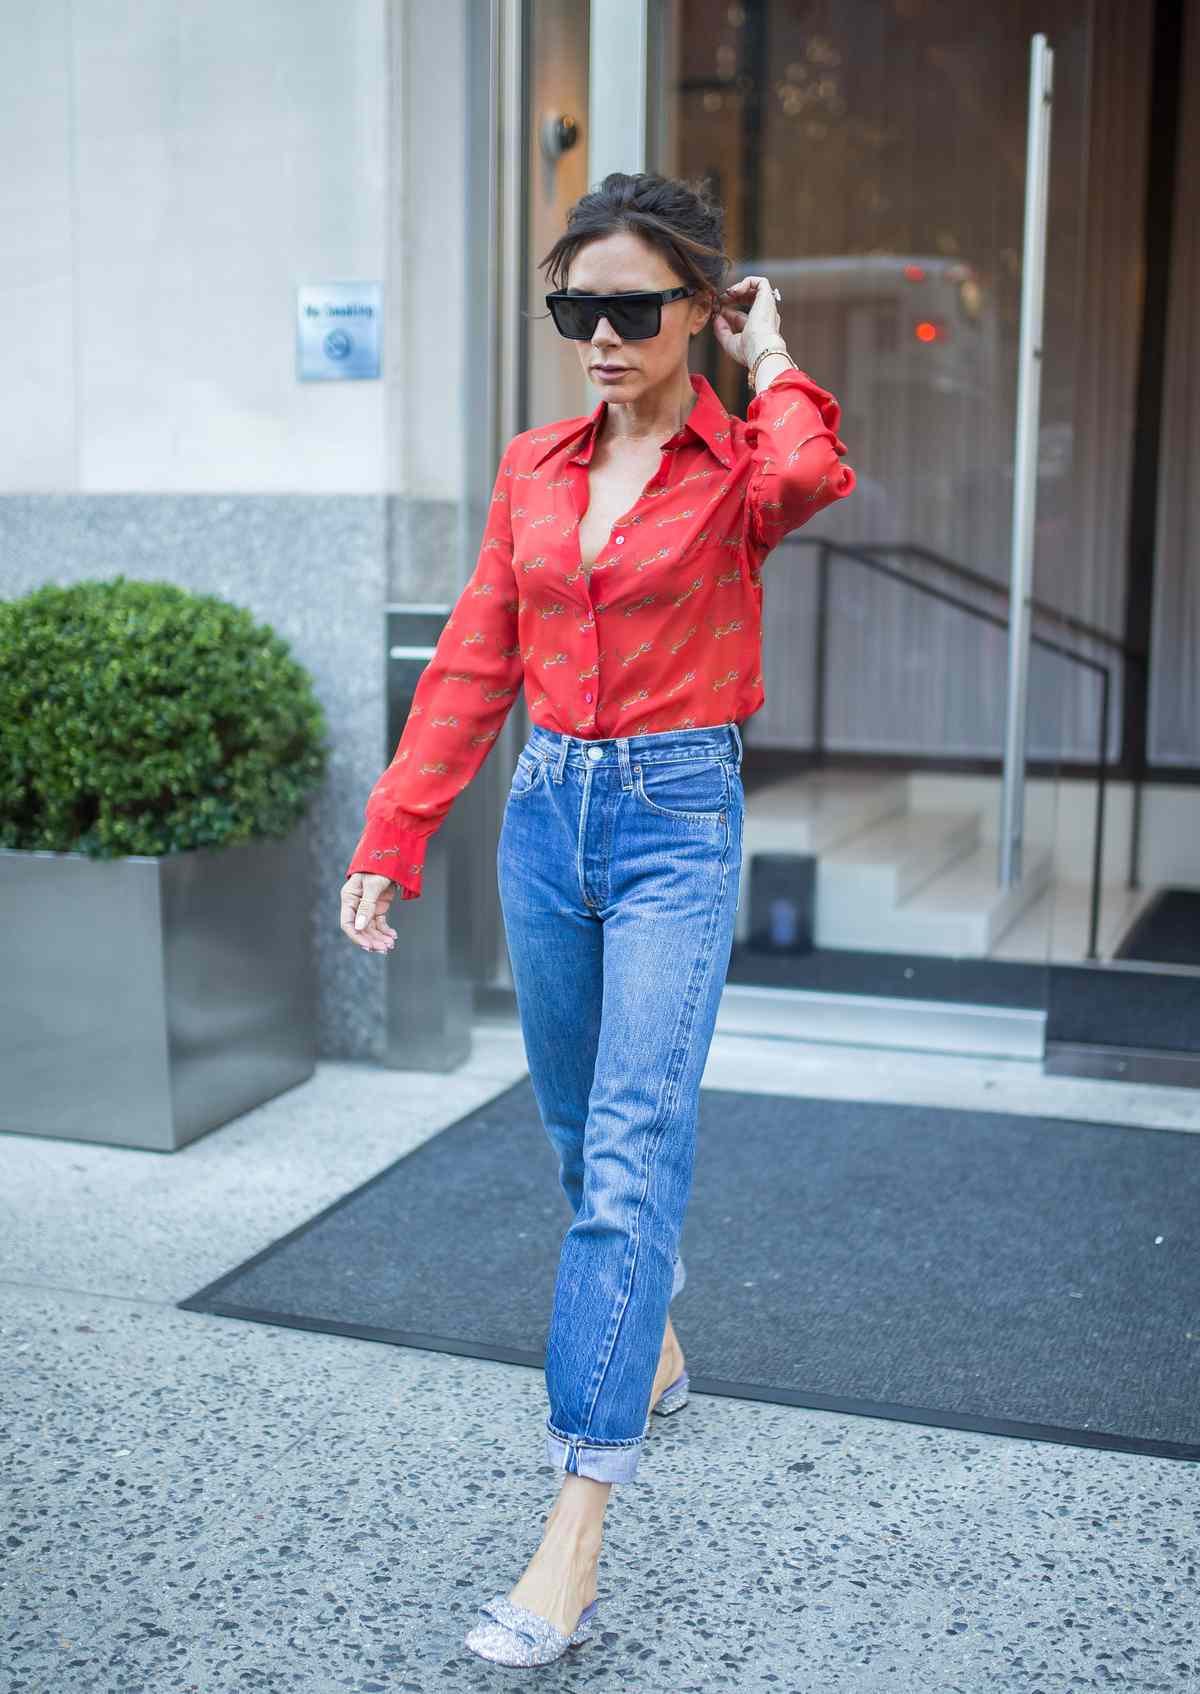 The Best Boyfriend Jeans: An Online Shopping Guide for the Popular 